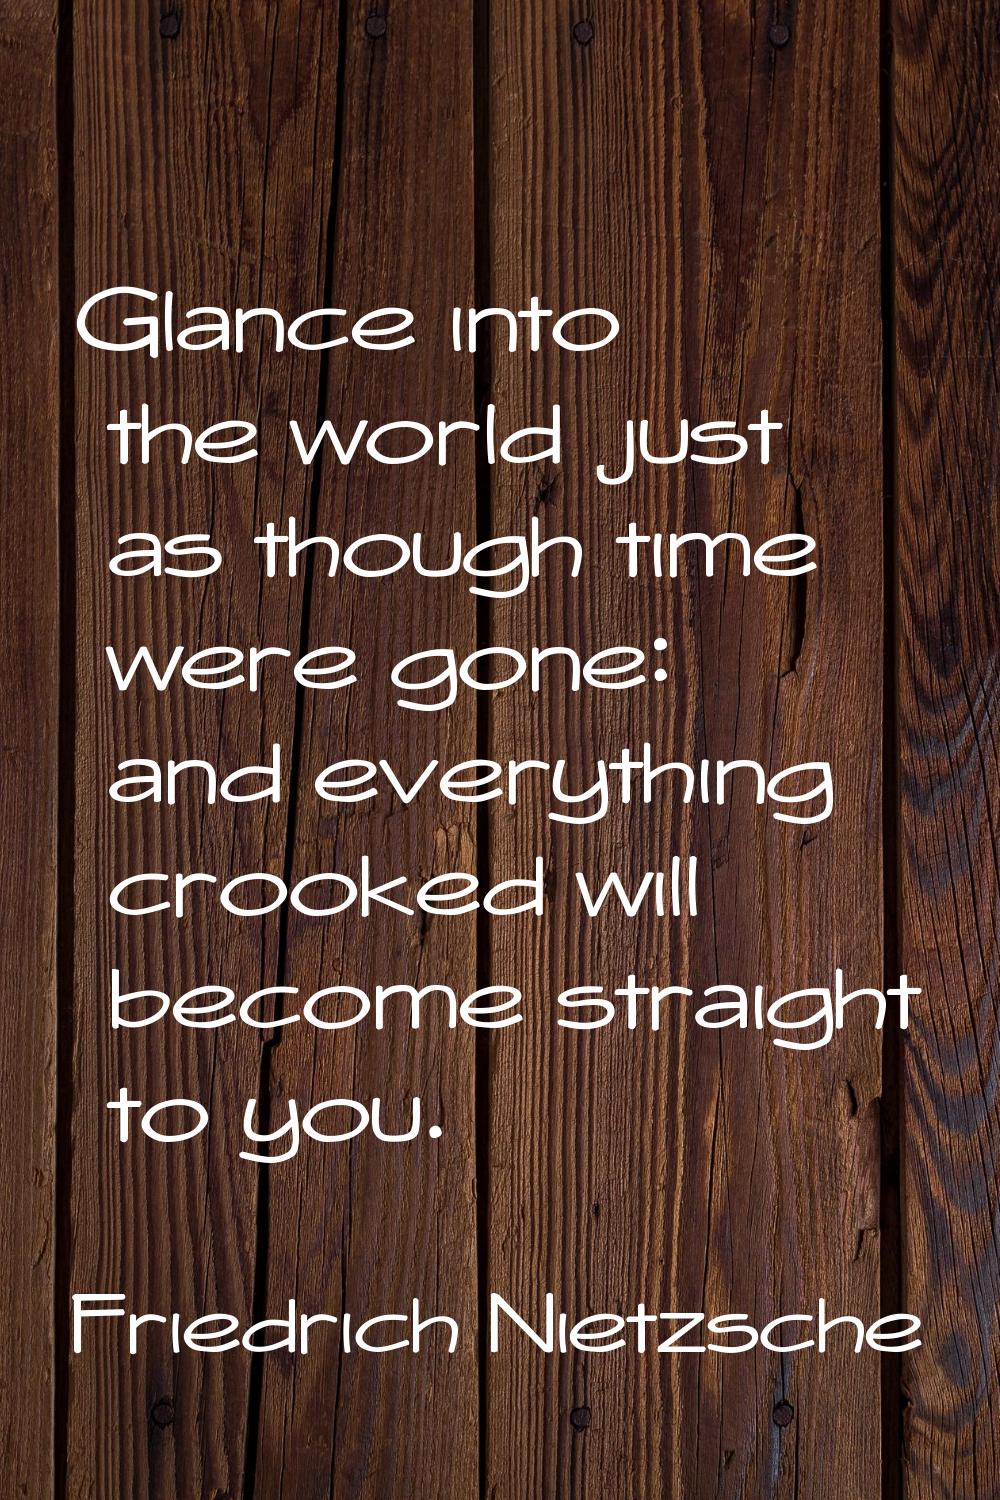 Glance into the world just as though time were gone: and everything crooked will become straight to